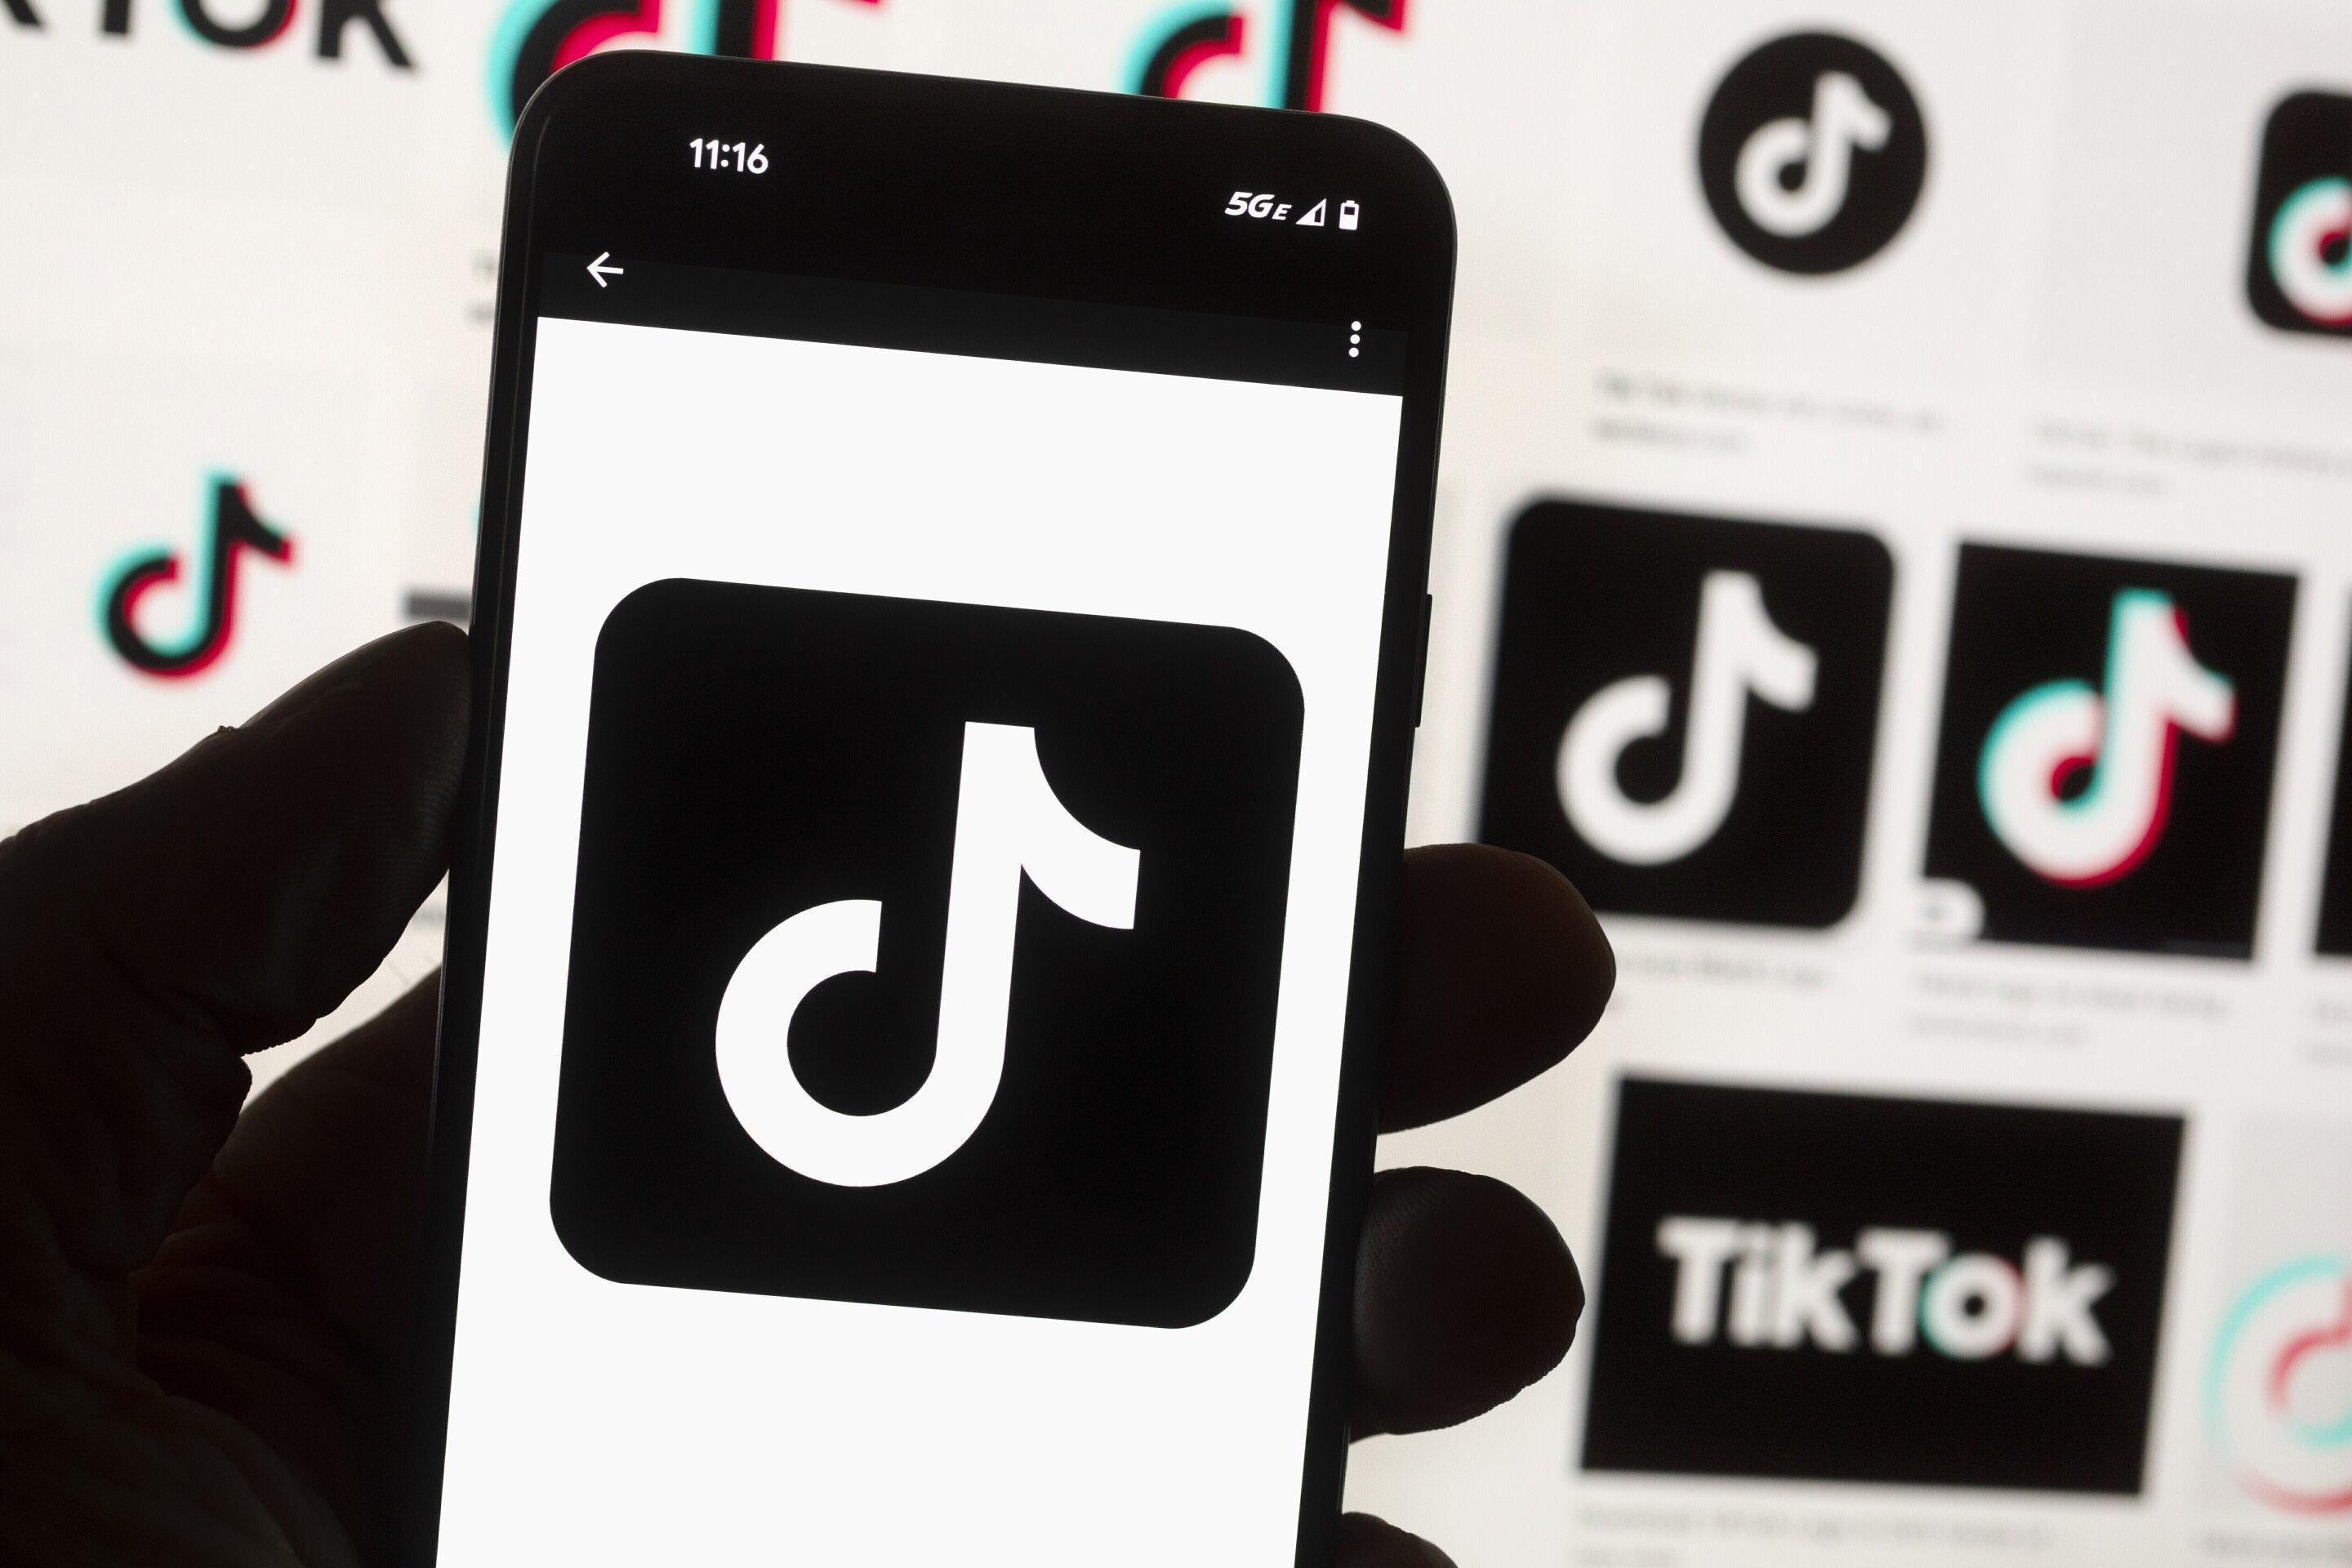 #Georgia, NH latest states to ban TikTok from state computers